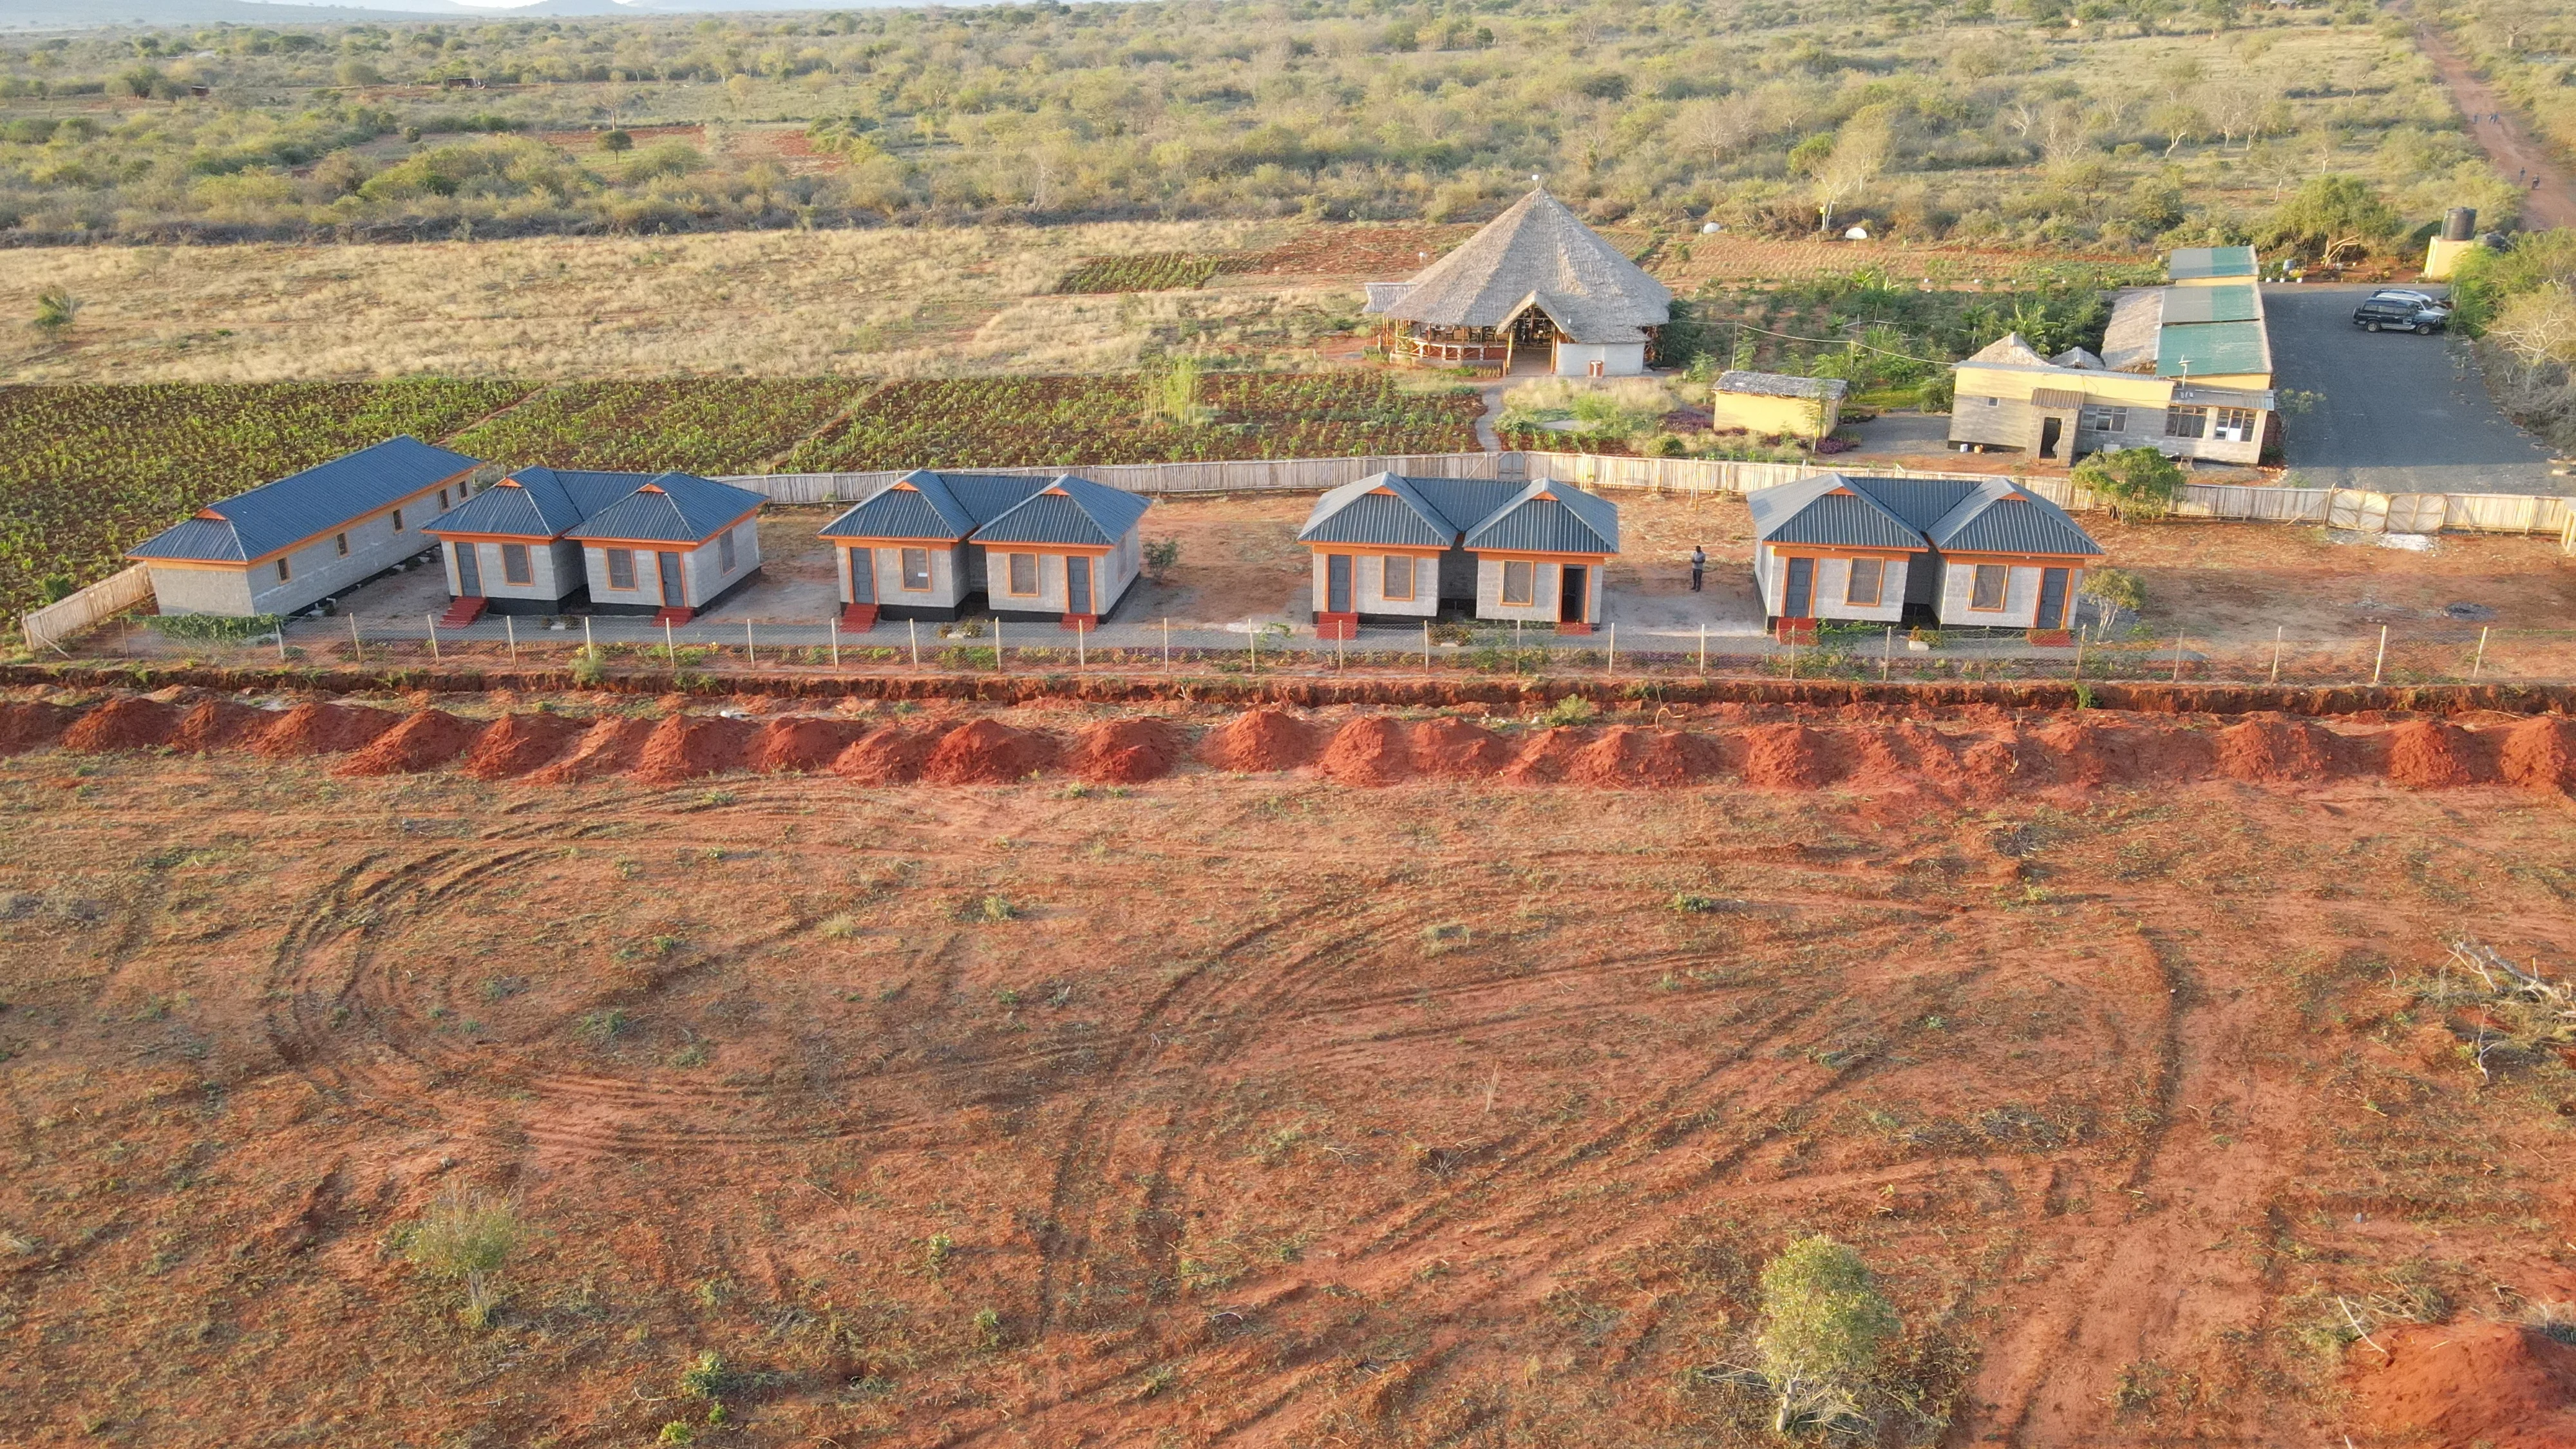 Tausa Tsavo Eco Lodge: Experiencing Tranquility and Adventure of the Tsavo National Park